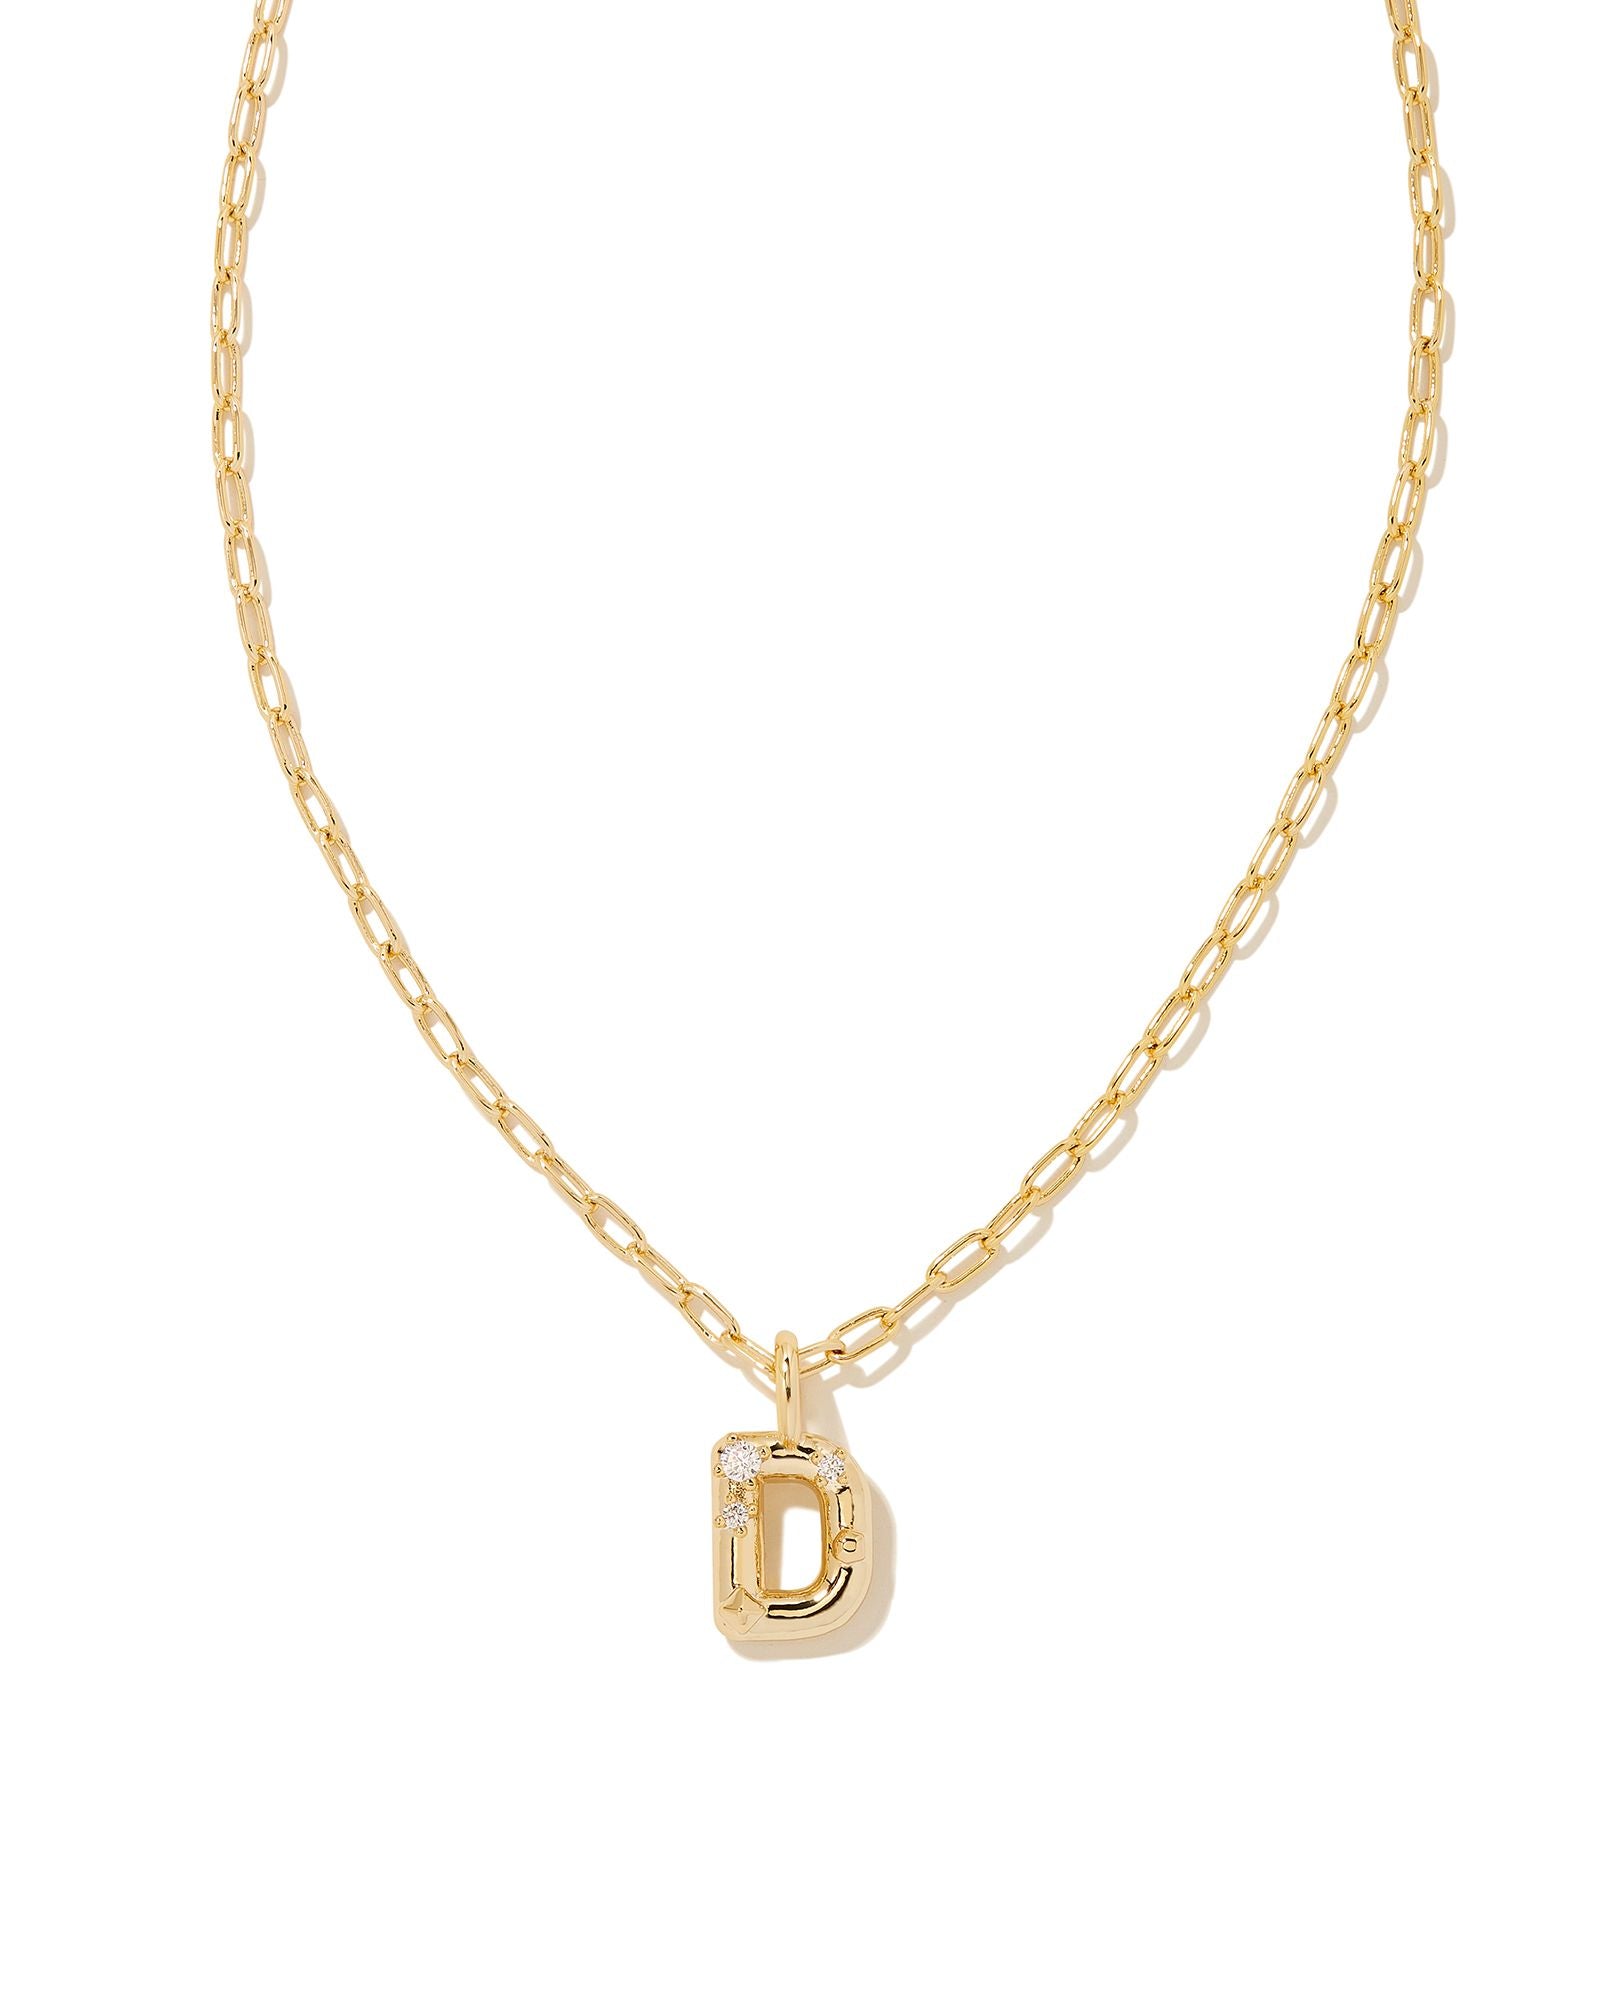 Crystal Letter D Pendant Necklace in Gold Metal